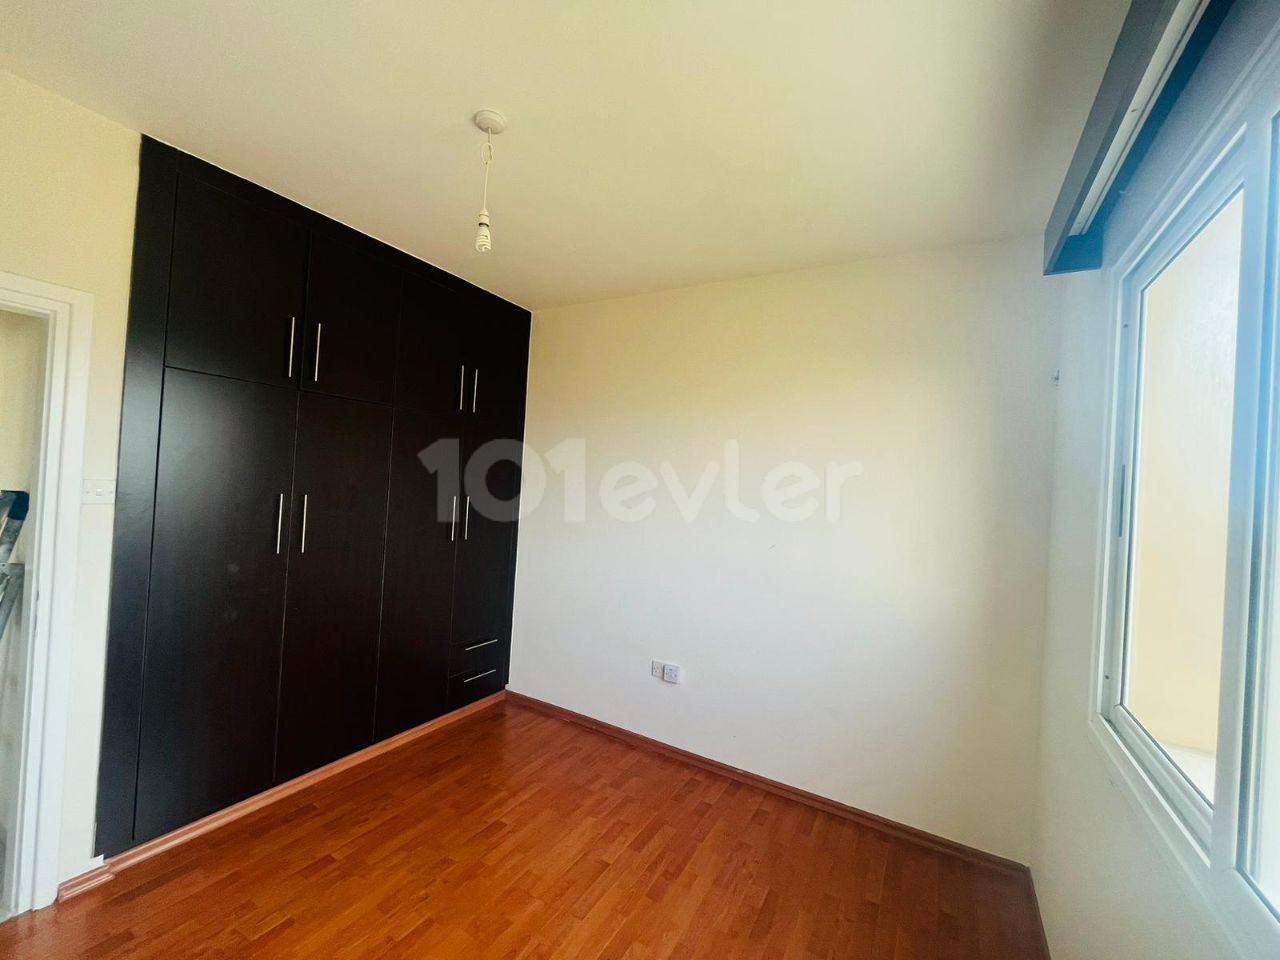 3+1 CENTER FLAT FOR SALE IN CANAKKALE, VERY CLEAN, MAINTAINED